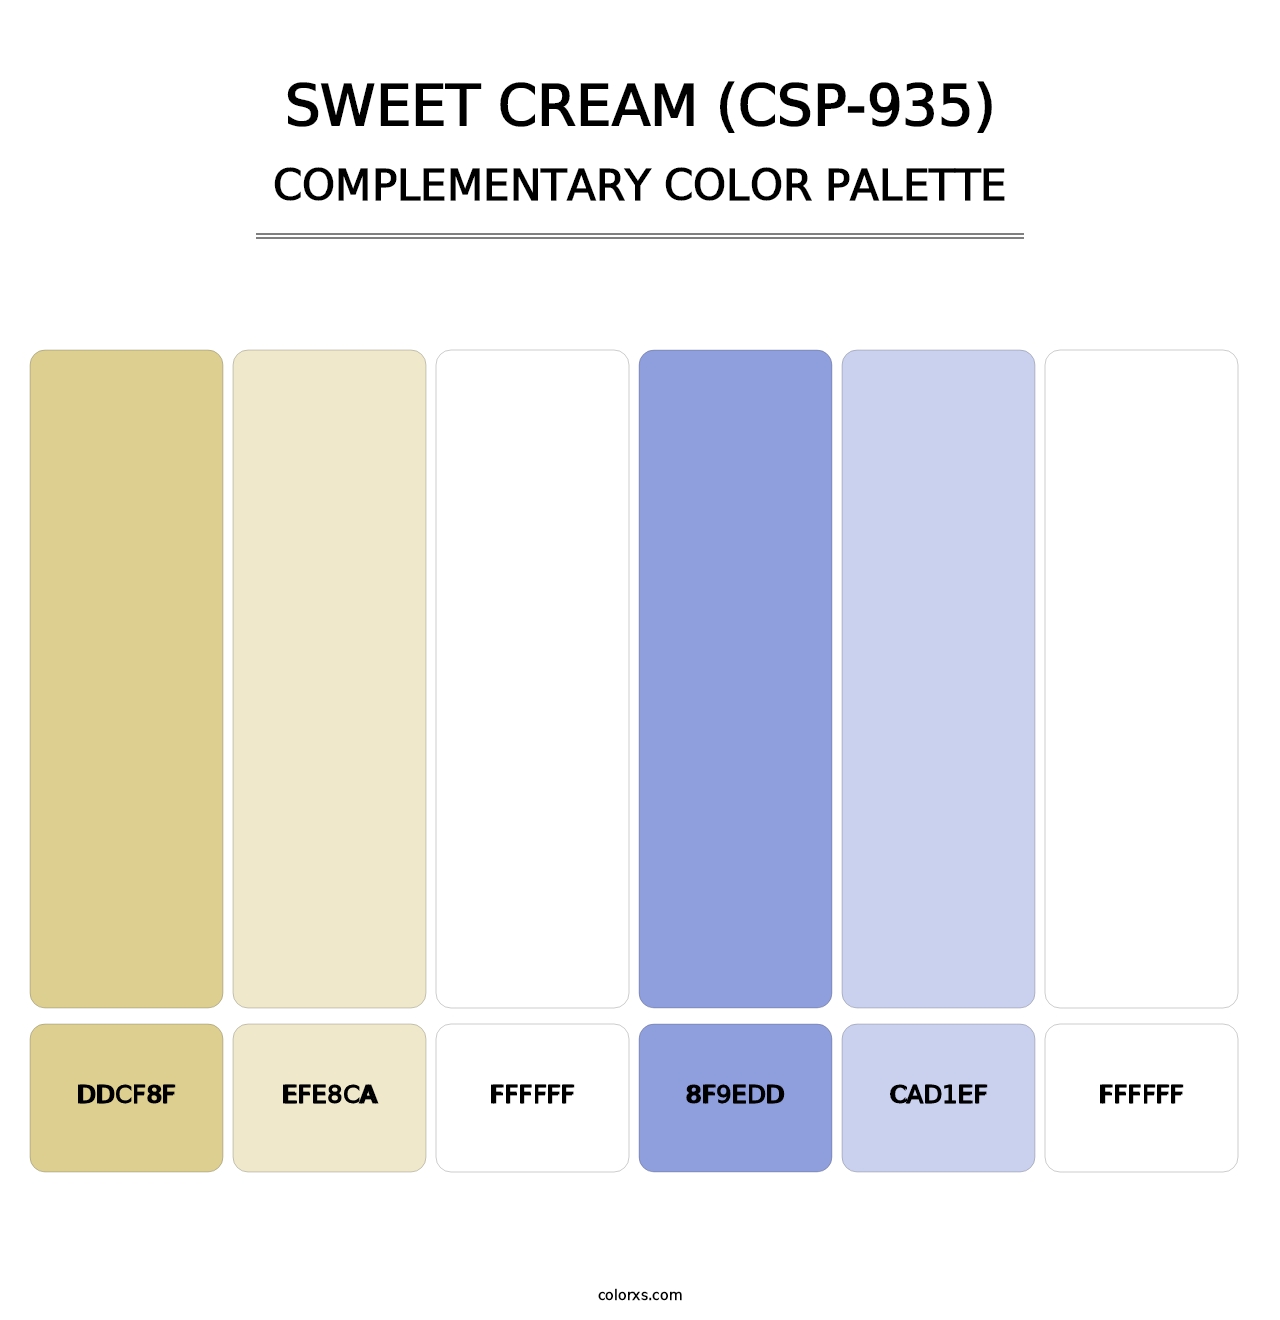 Sweet Cream (CSP-935) - Complementary Color Palette